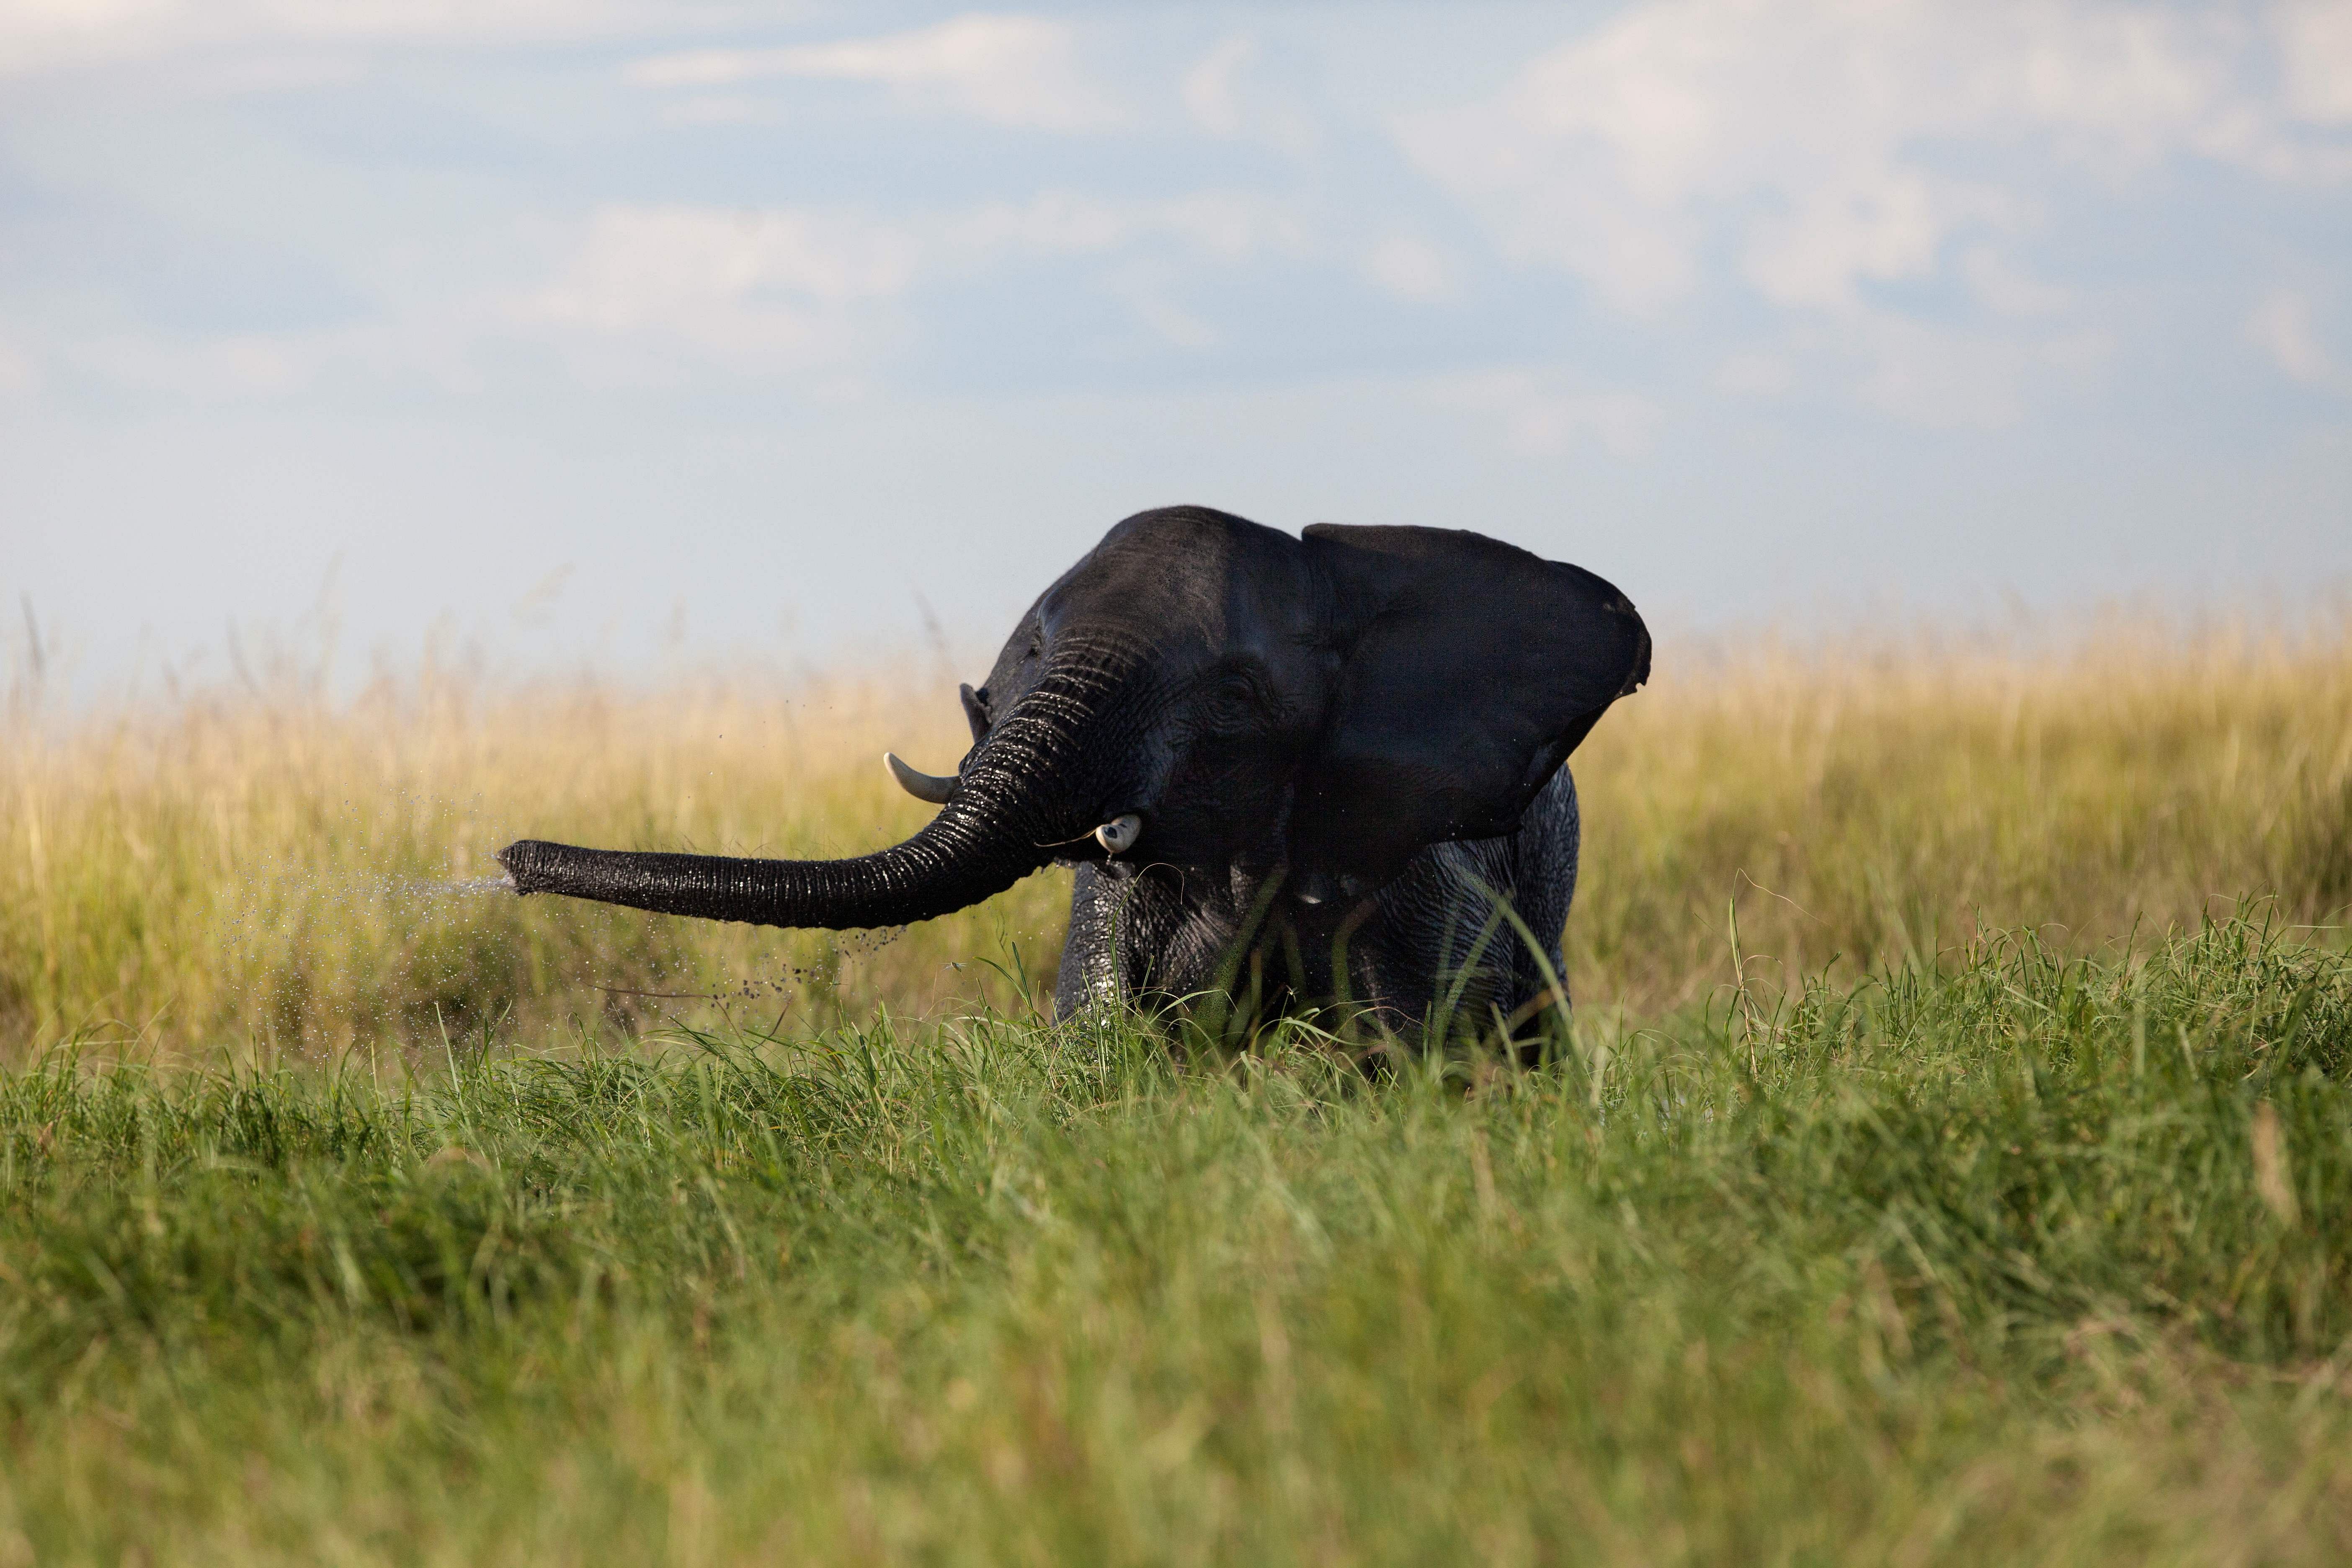 In this file photo taken on March 26, 2015 a young elephant at play in the Chobe river in Botswana Chobe National Park, in the north eastern of the country. - Ninety elephant carcasses have been discovered in Botswana with their tusks hacked off, a charity said on September 4, 2018, in figures fiercely contested by the government. Elephants Without Borders said the grim discovery of scores of elephant carcasses, made over several weeks during an aerial survey, is believed to be one of Africa's worst mass poaching sprees. (Photo by AFP)